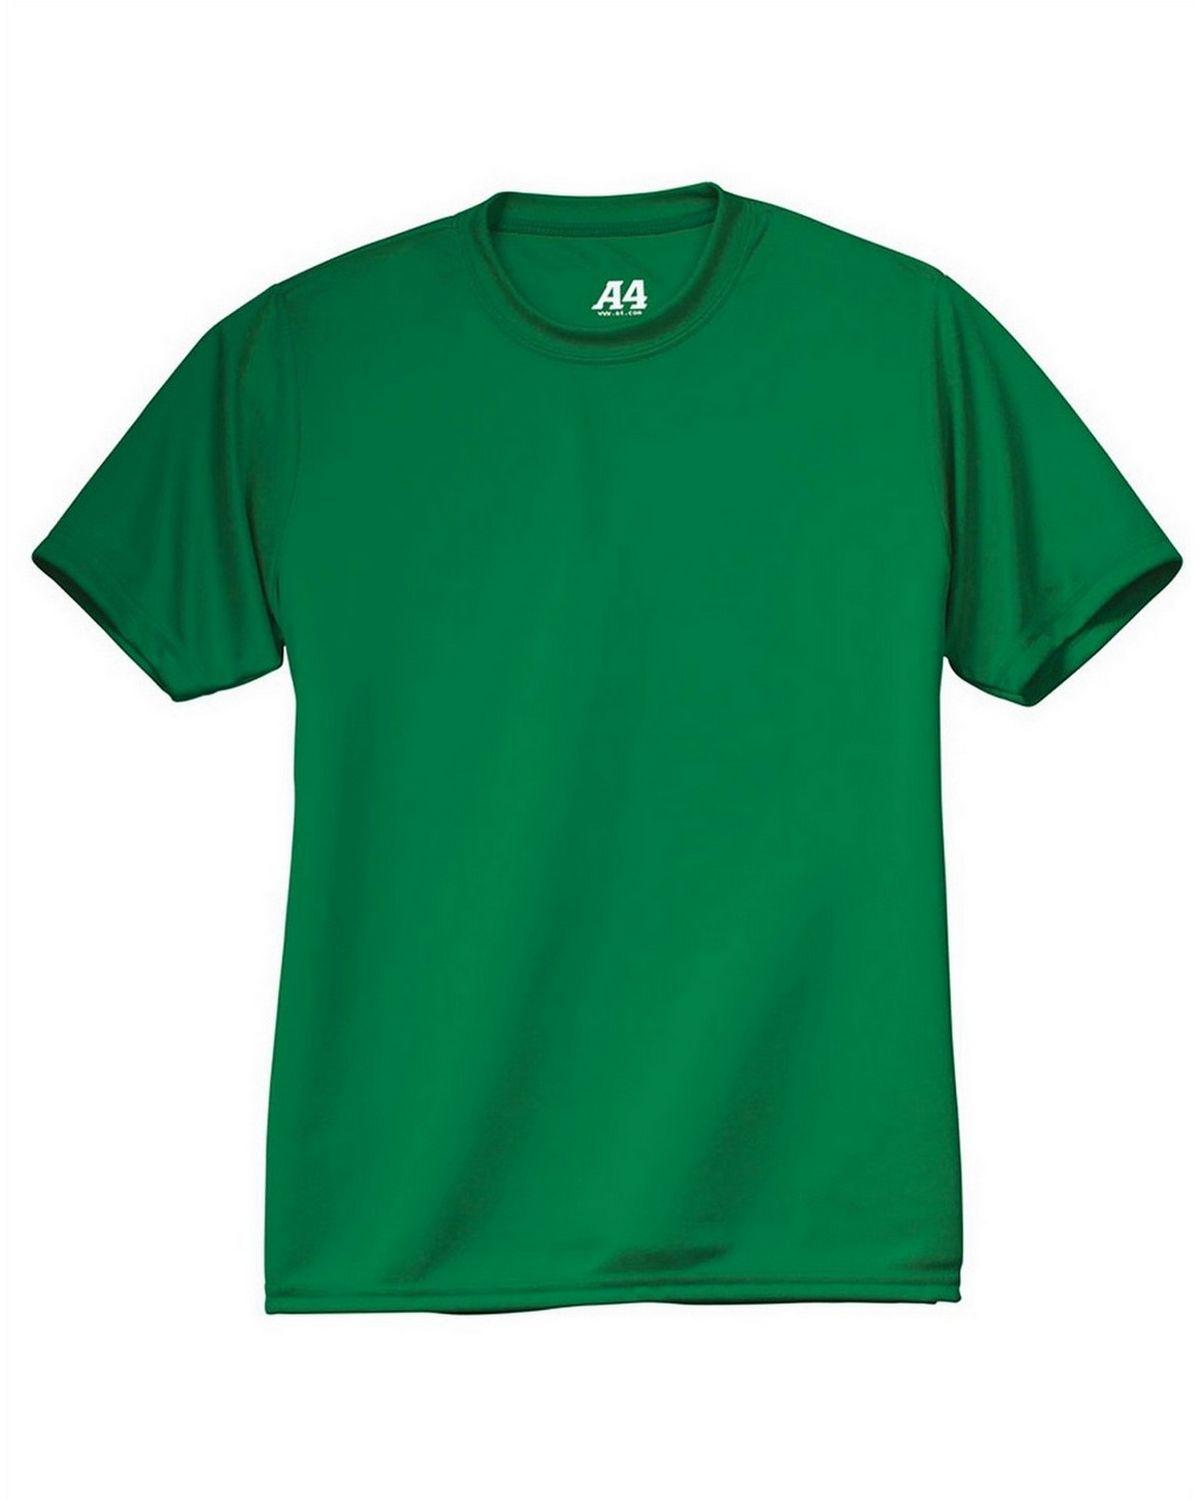 Buy A4 NB3142 Youth Cooling Performance Tee